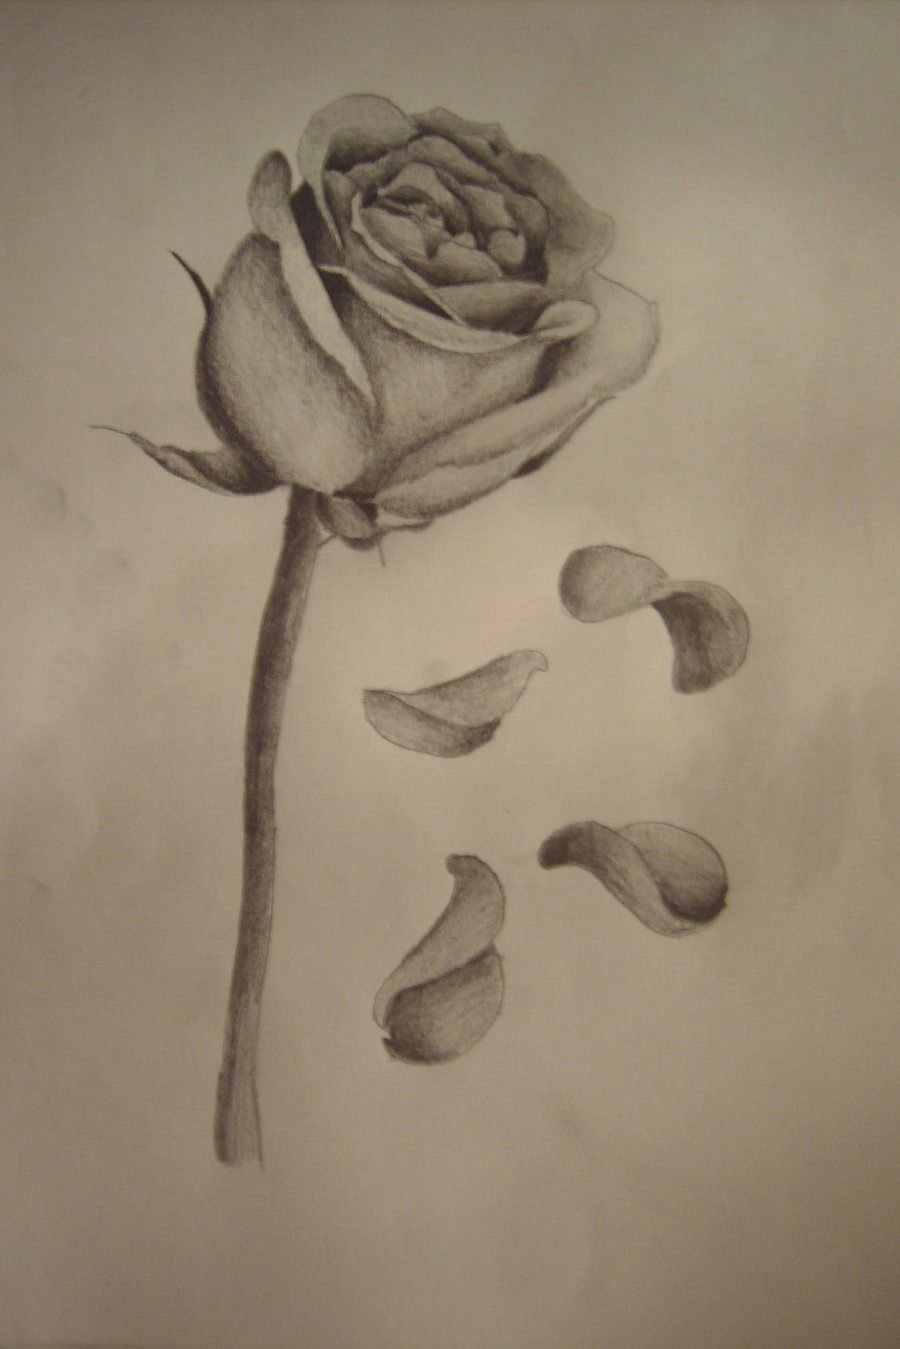 Drawing Of A Long Stem Rose Rose with Falling Petals Tattoos Tattoos Rose Tattoos Tattoo